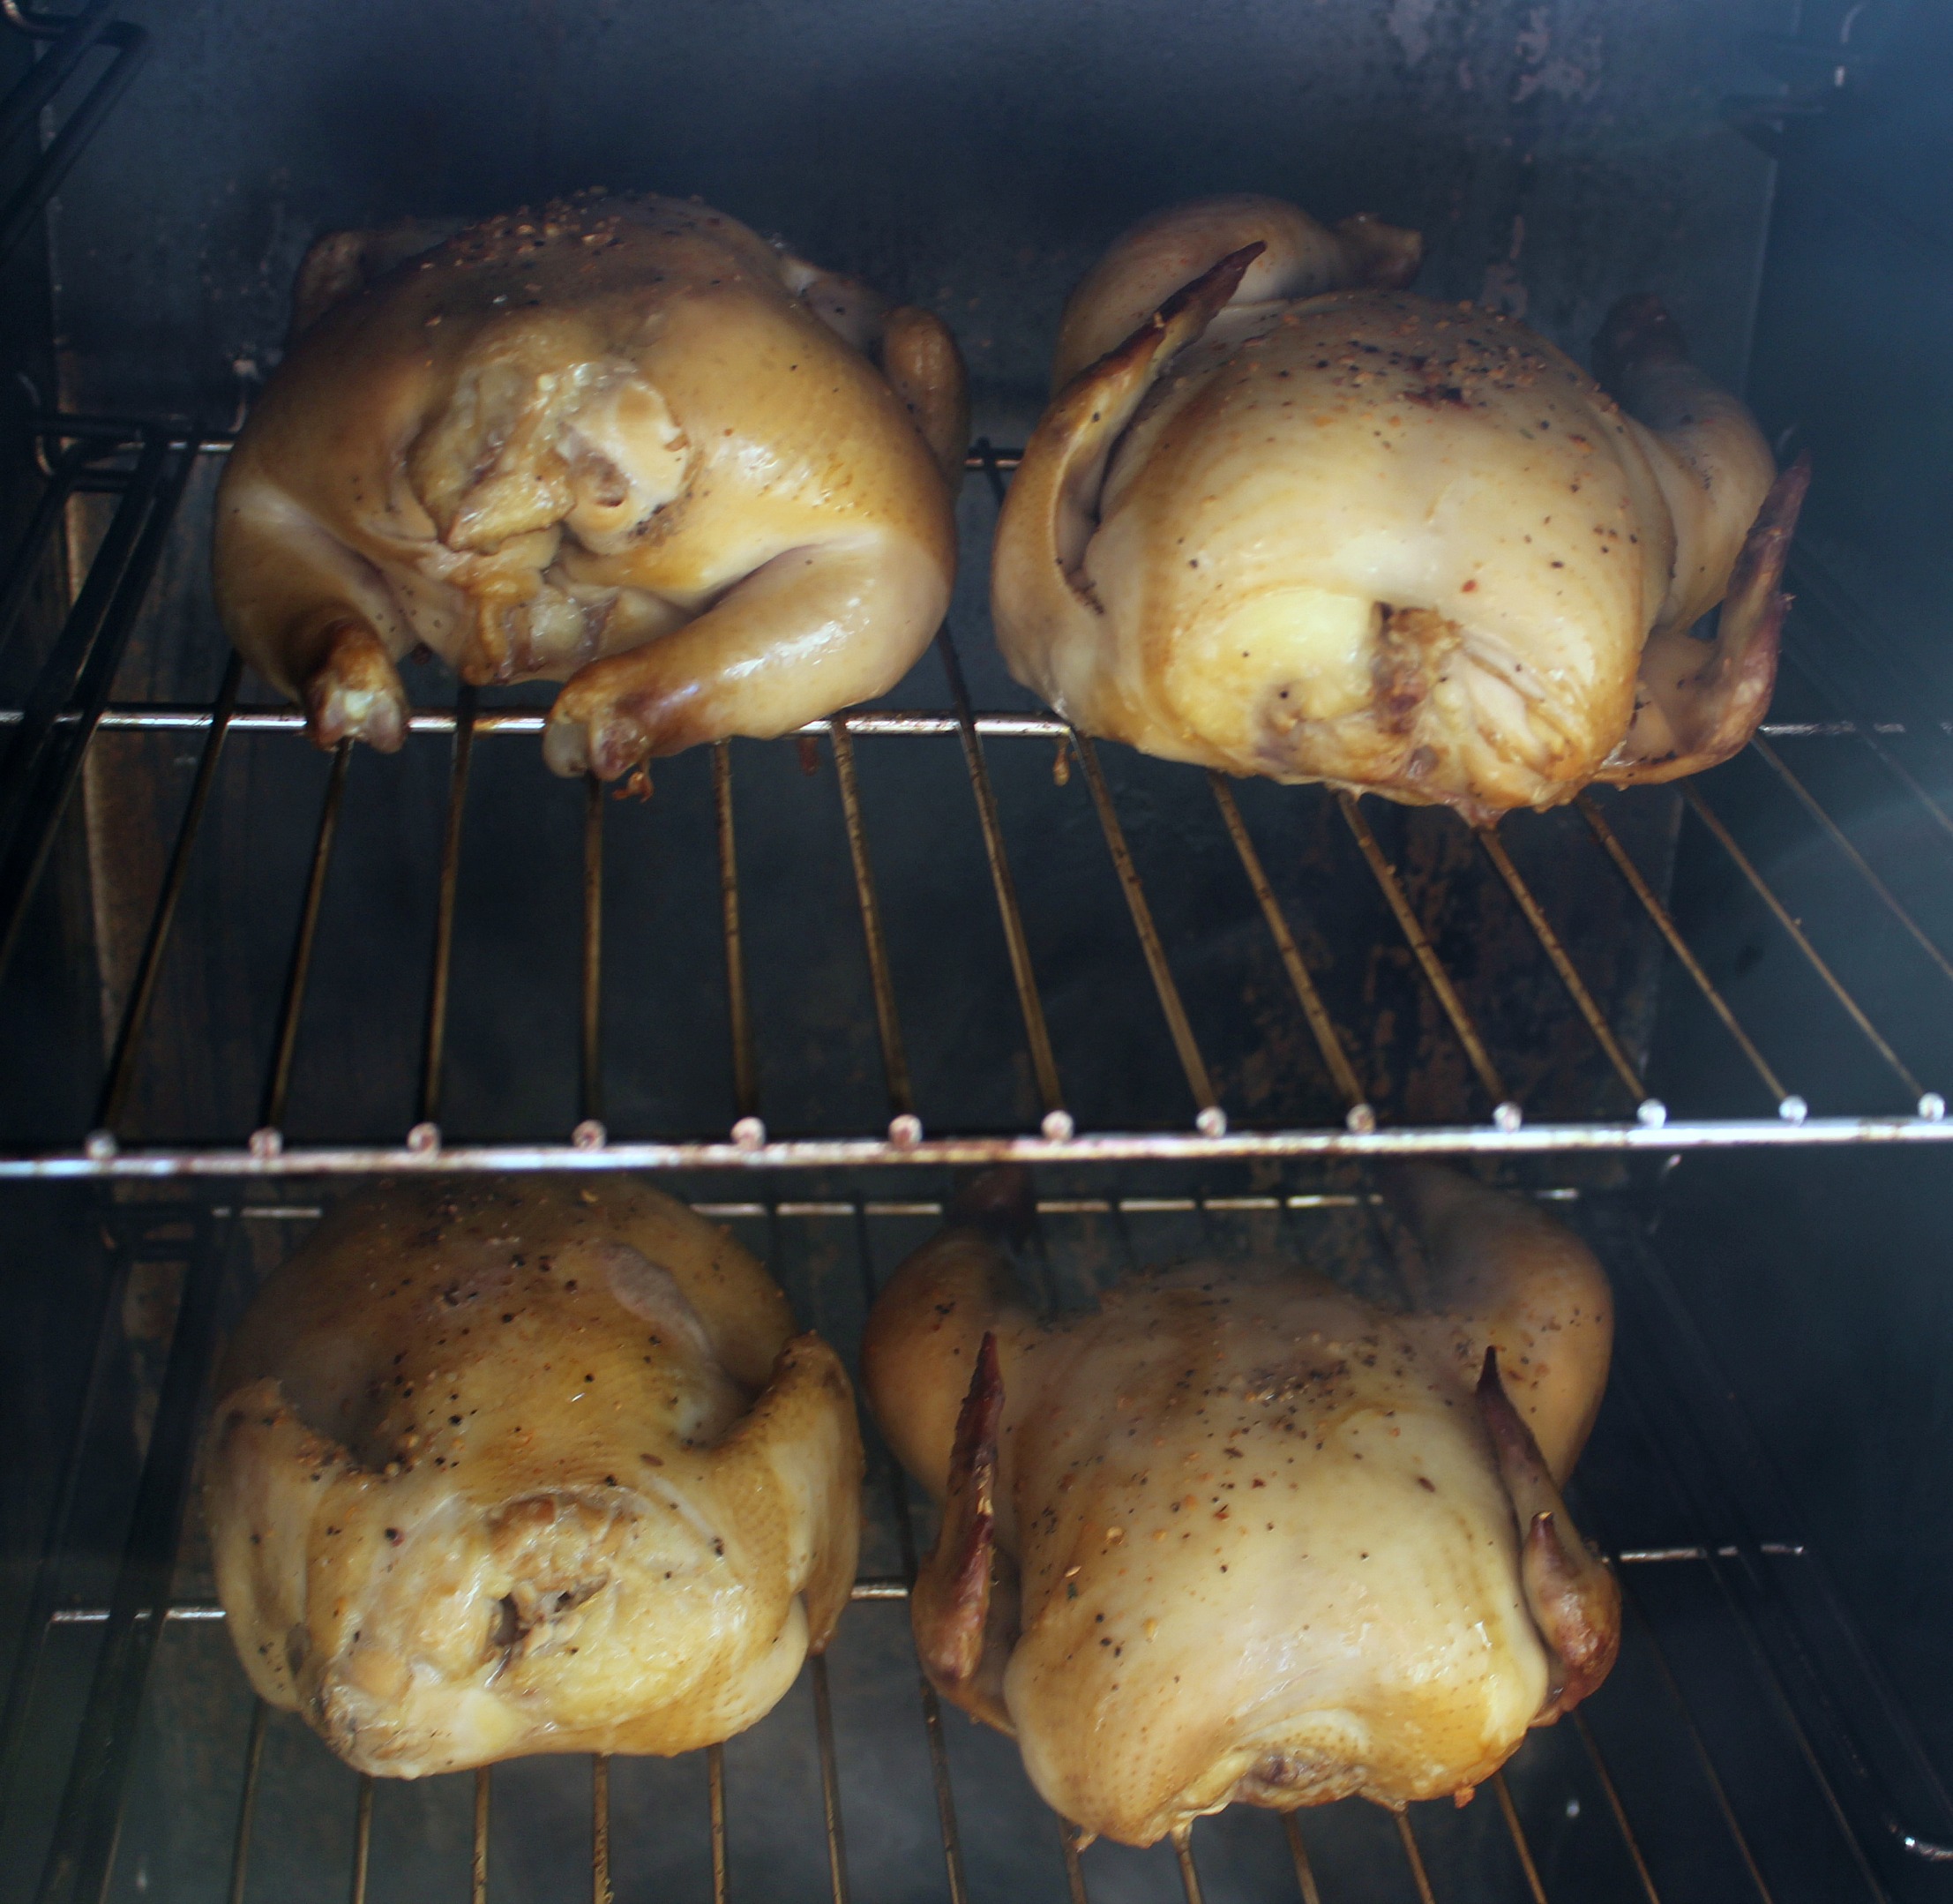 Smoked Cornish Game Hens are perfect to smoke for a dinner!! Use a homemade brine to add flavor and the leftovers make amazing soup too!